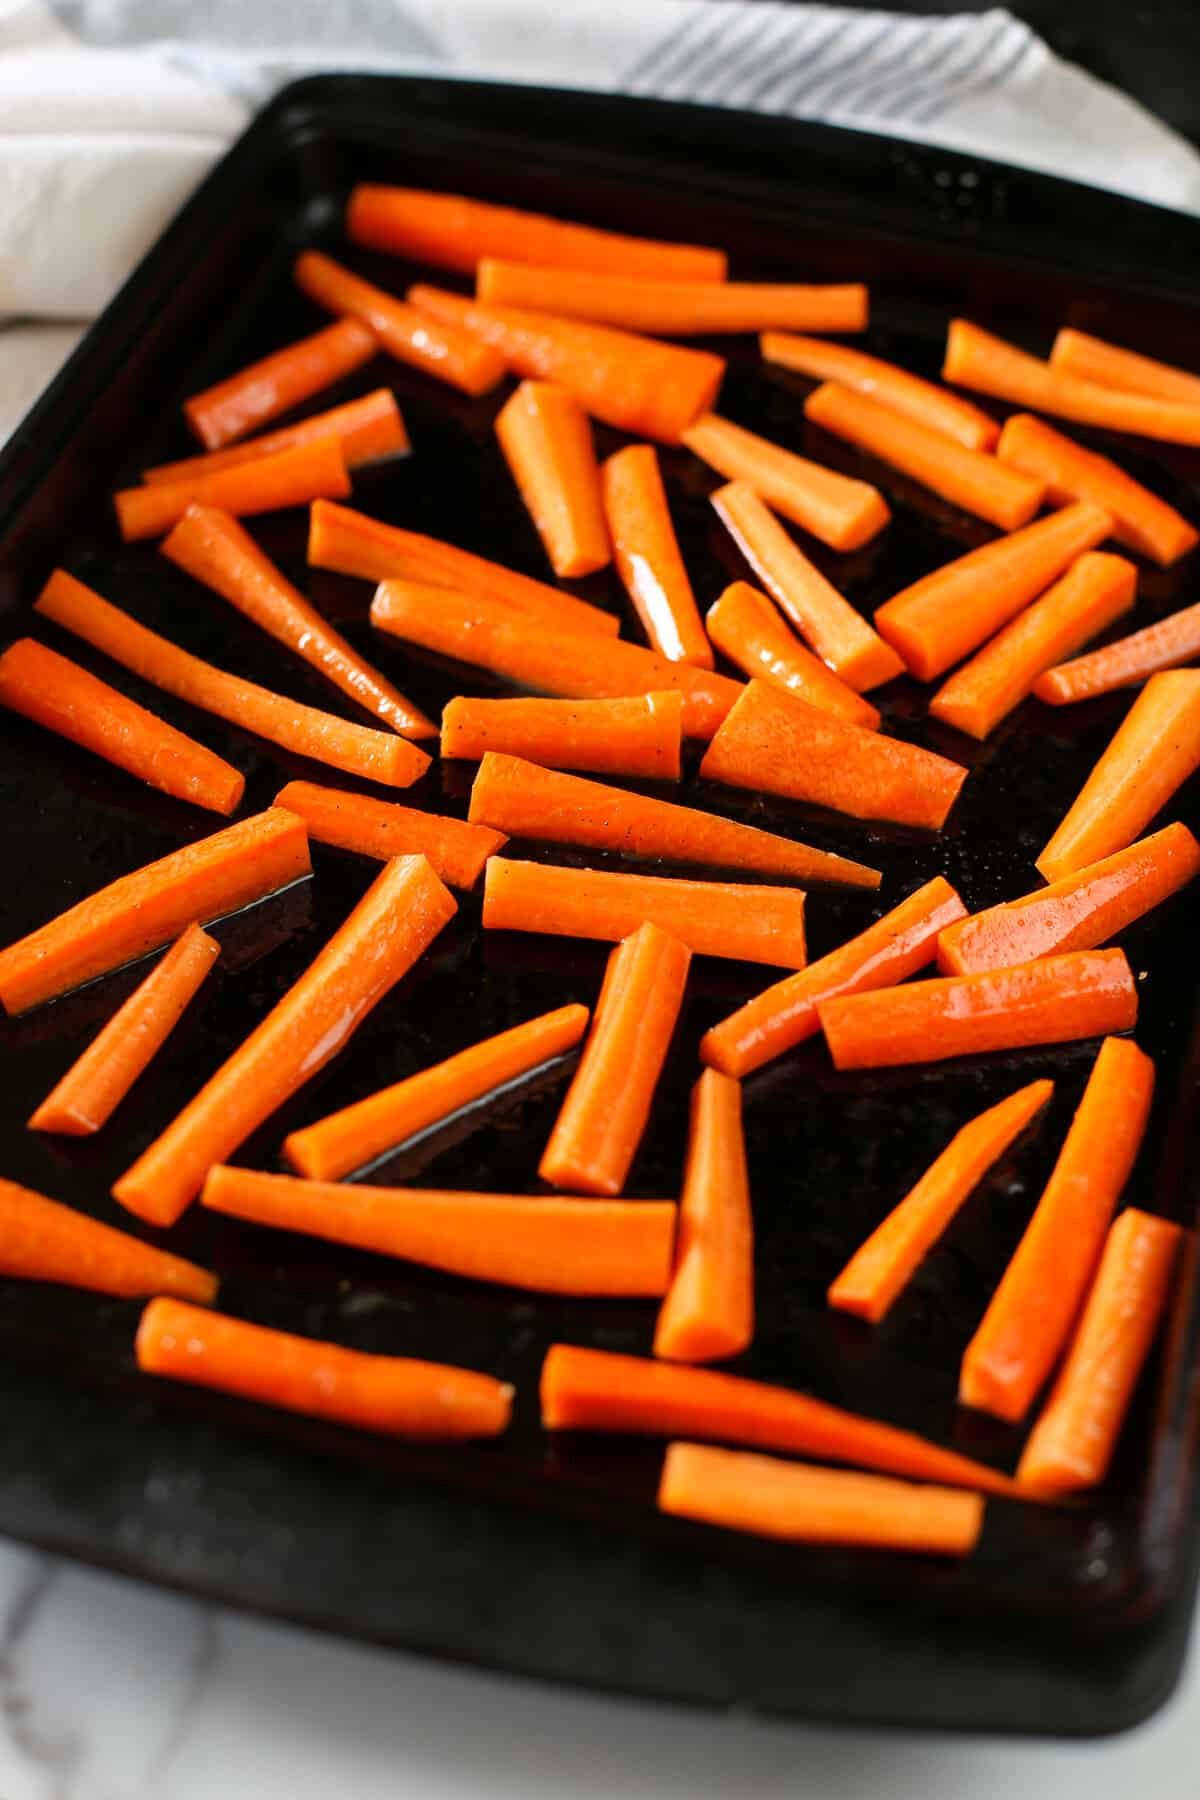 Raw carrot slices placed on roasting pan.